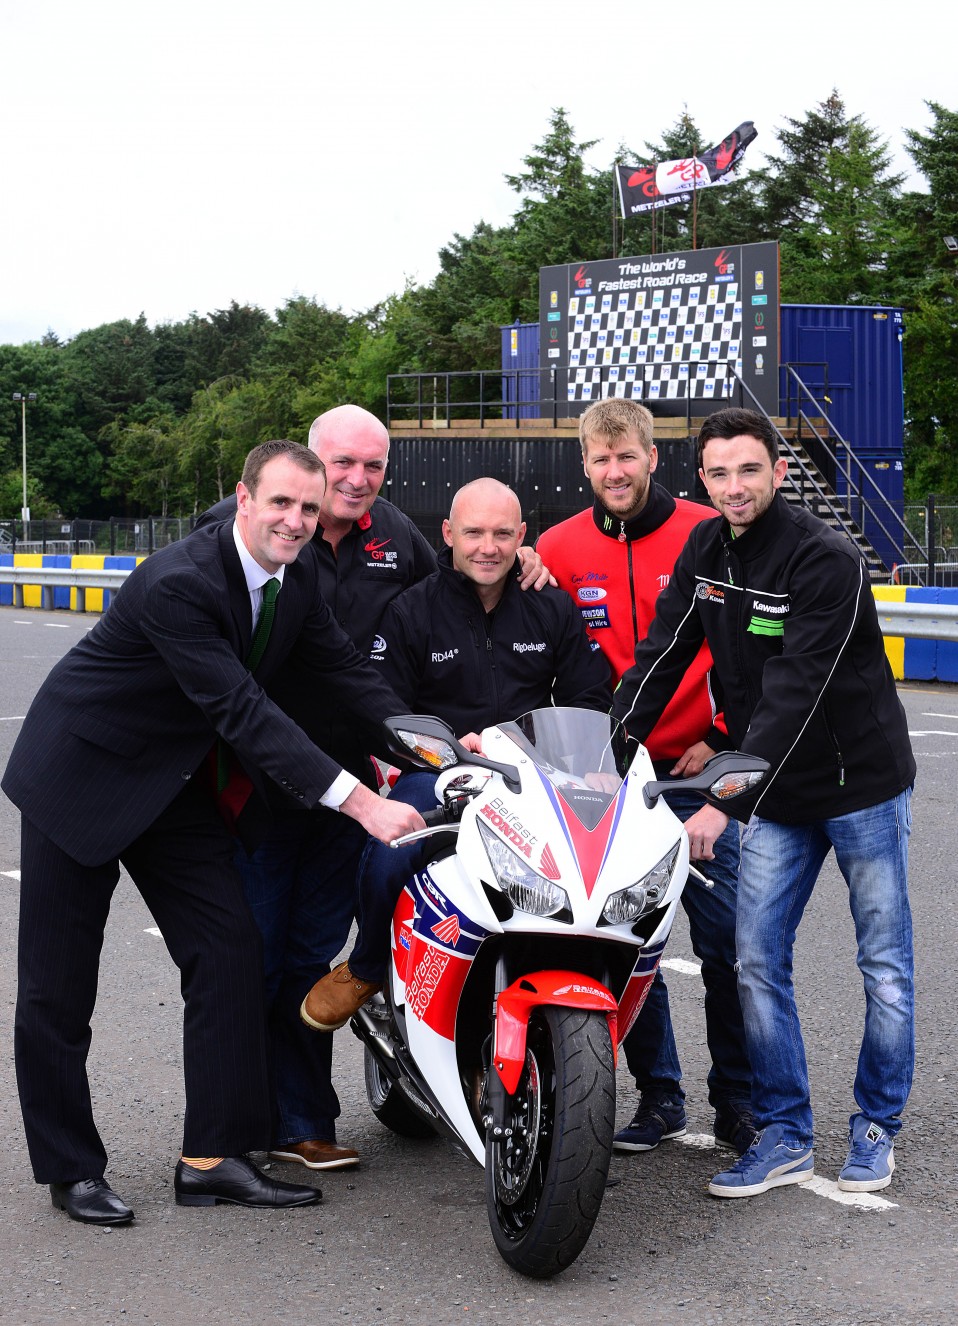 ENVIRONMENT Minister Mark H Durkan has joined the Dundrod and District Motorcycle Club to appeal to motorcyclists to take care on the roads on the eve of the Ulster Grand Prix. Mr Durkan urged biking enthusiasts attending or watching the race to leave the high speeds to the professionals. Pictured on the grid at the famous Dundrod circuit is Environment Minister Mark H Durkan, Clerk of the Course at the Metzeler Ulster Grand Prix Noel Johnston and racers Keith Amor, Ian Hutchinson and Glenn Irwin.